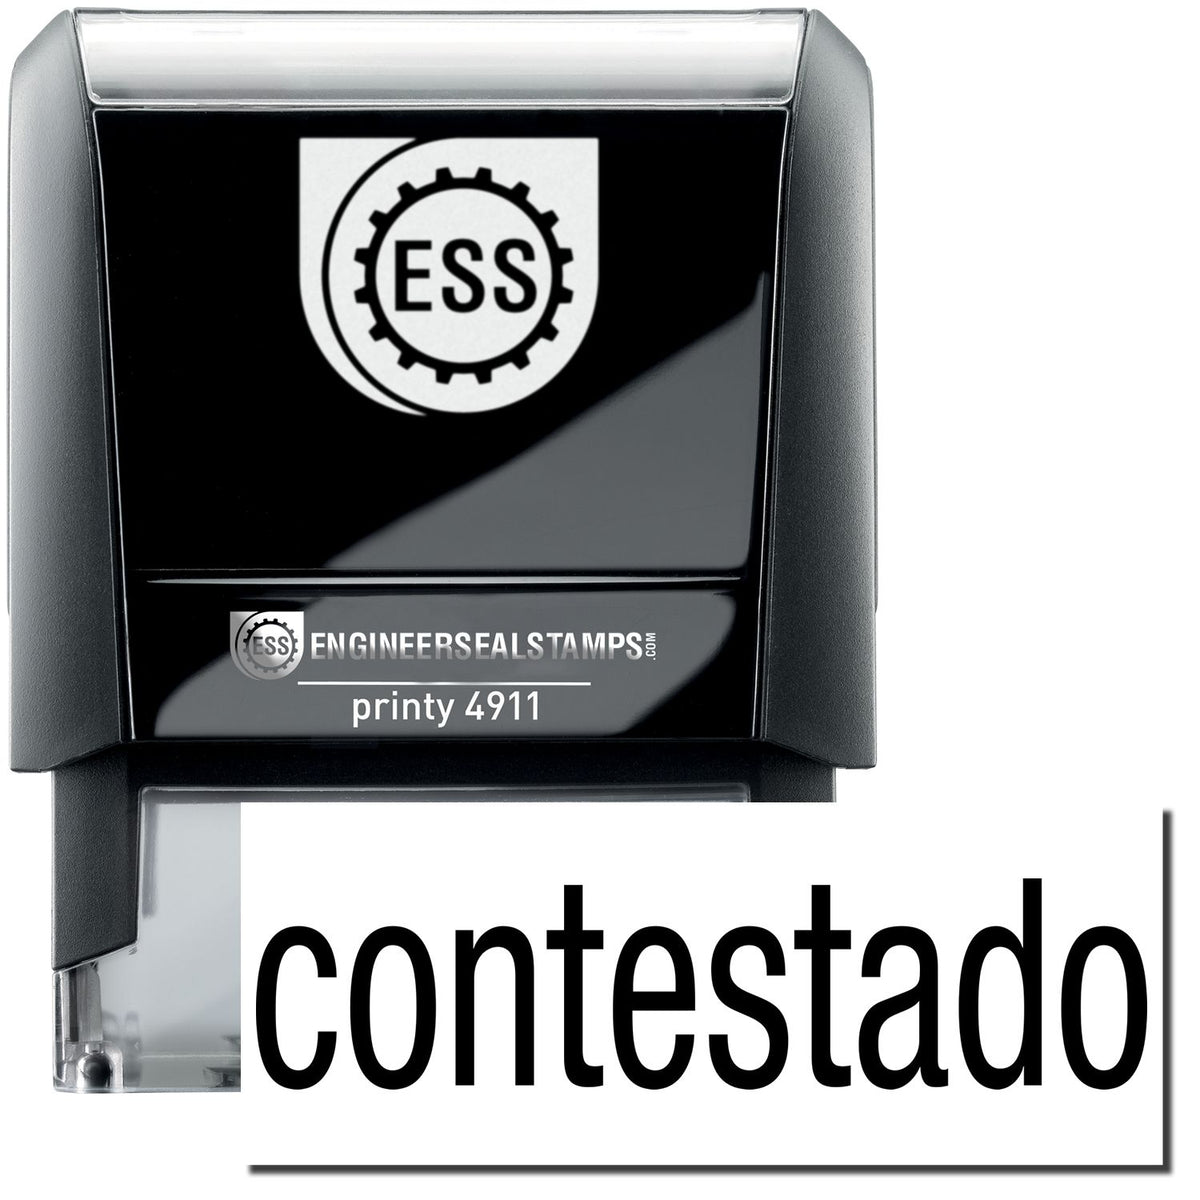 A self-inking stamp with a stamped image showing how the text &quot;contestado&quot; is displayed after stamping.